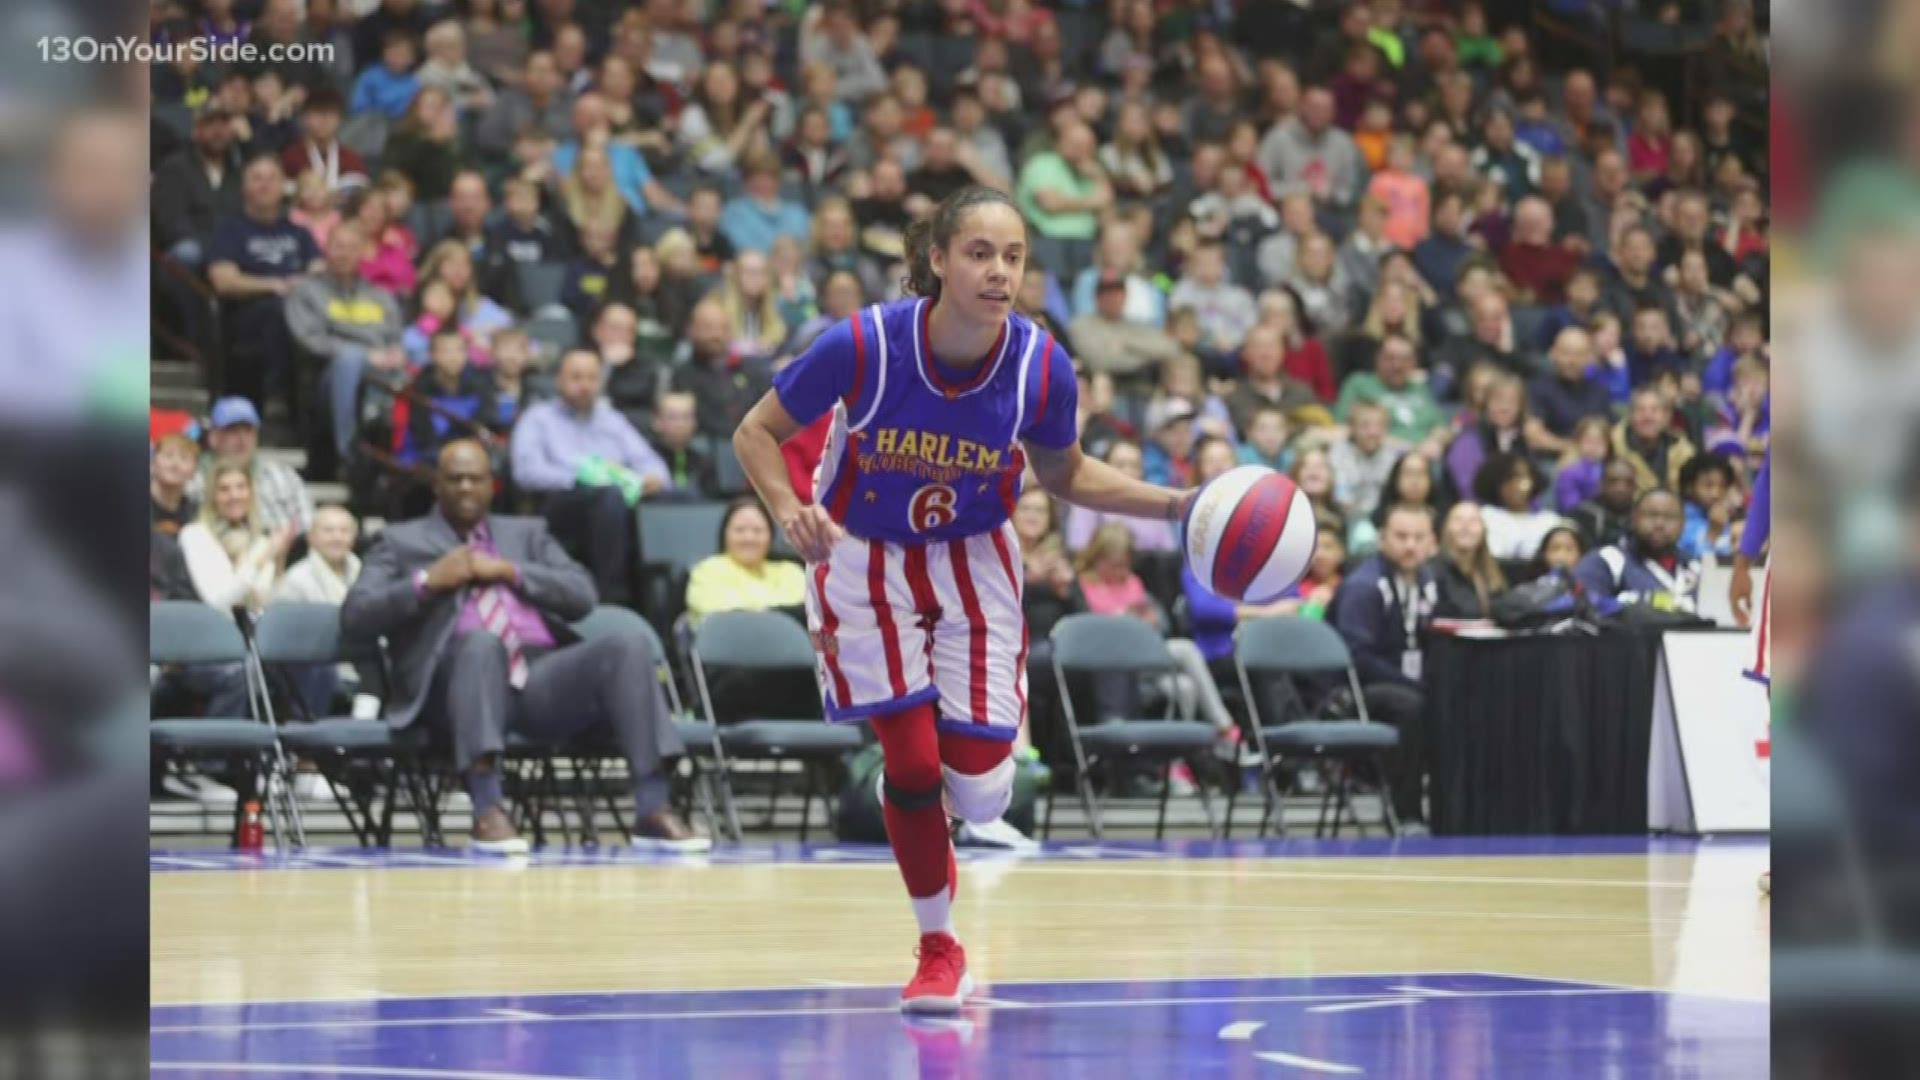 The world-famous Harlem Globetrotters are headed to Grand Rapids.  The show is Sunday, January 26 at 3 p.m. at Van Andel Arena.